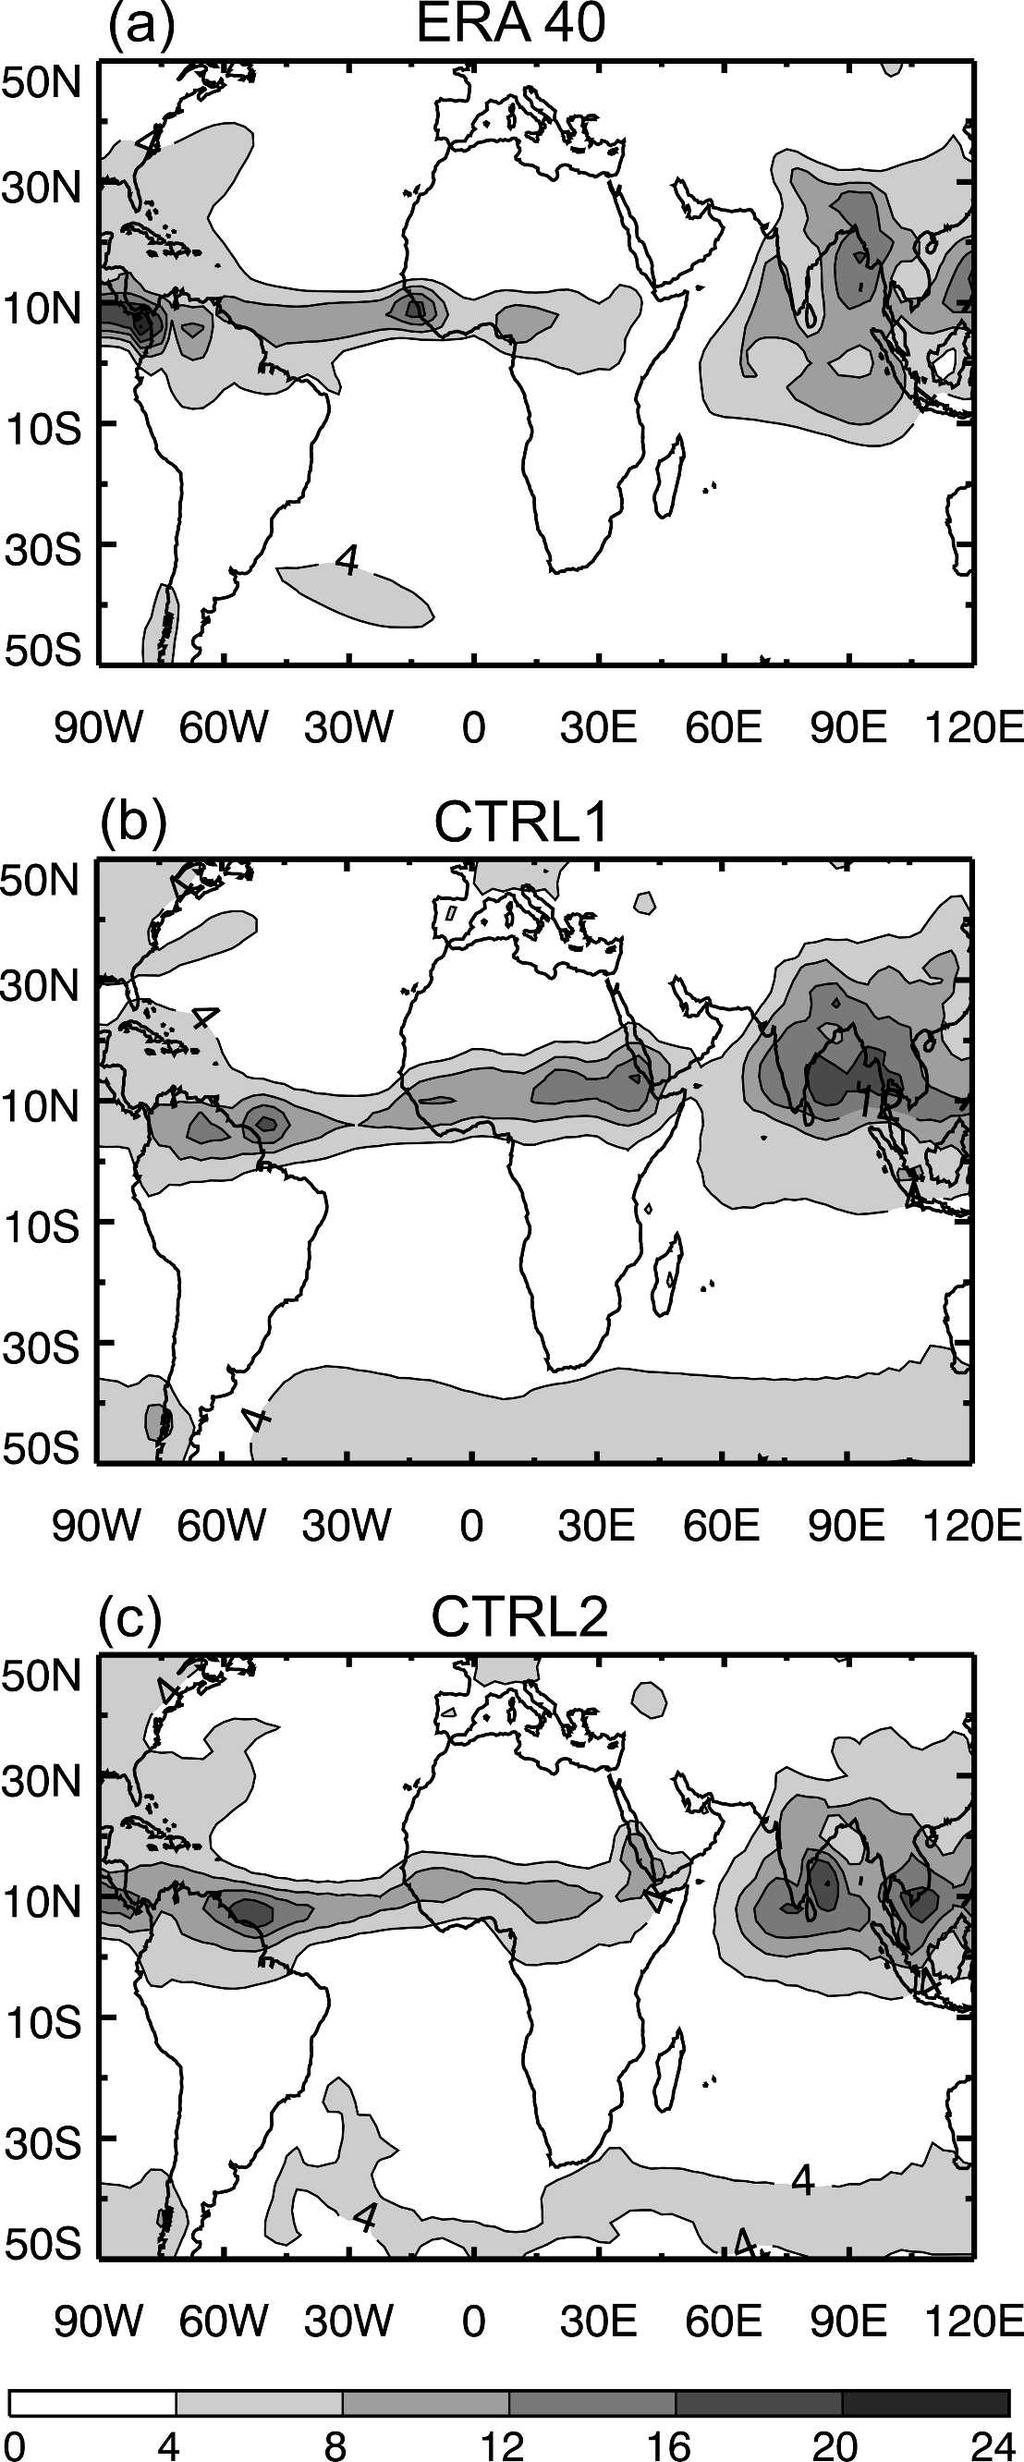 15 JANUARY 2008 R I C H T E R E T A L. 219 FIG. 5. Divergence (1 s 1 10 6 ) and horizontal wind at 700 hpa in July for (a) ERA-40 and (b) CTRL1.